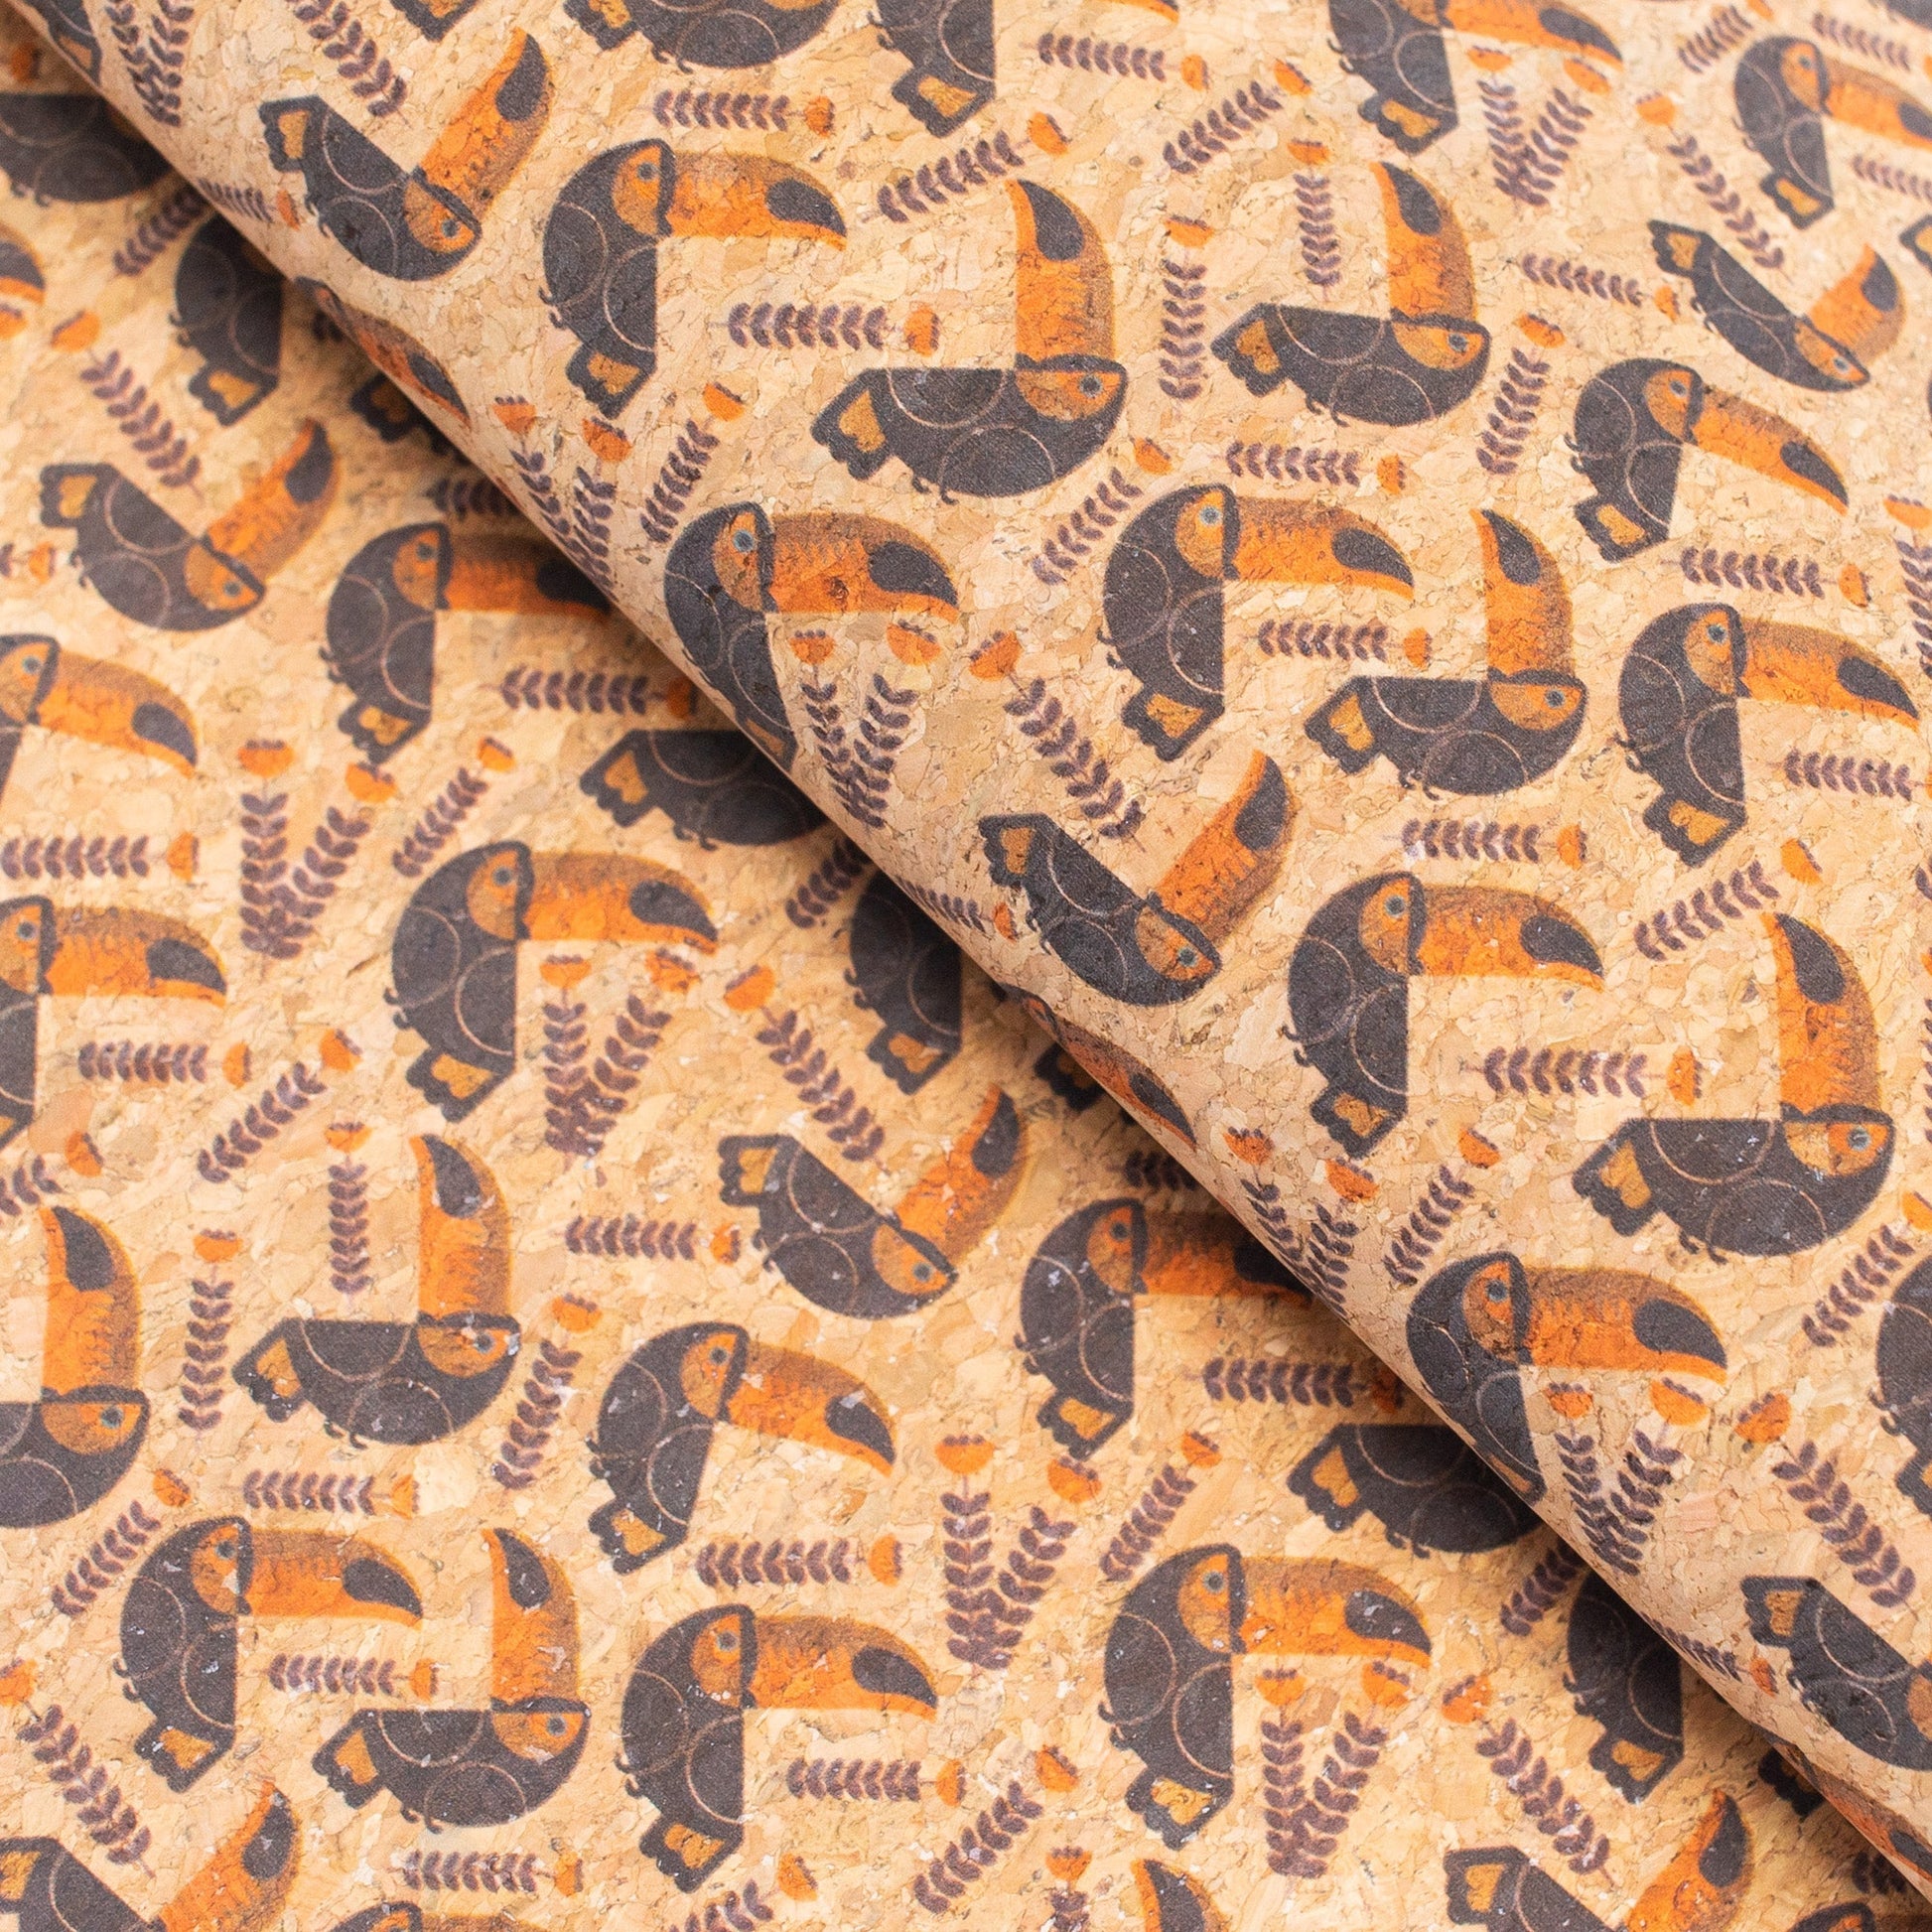 Pecan and Twig Vegan Cork Fabric | THE CORK COLLECTION